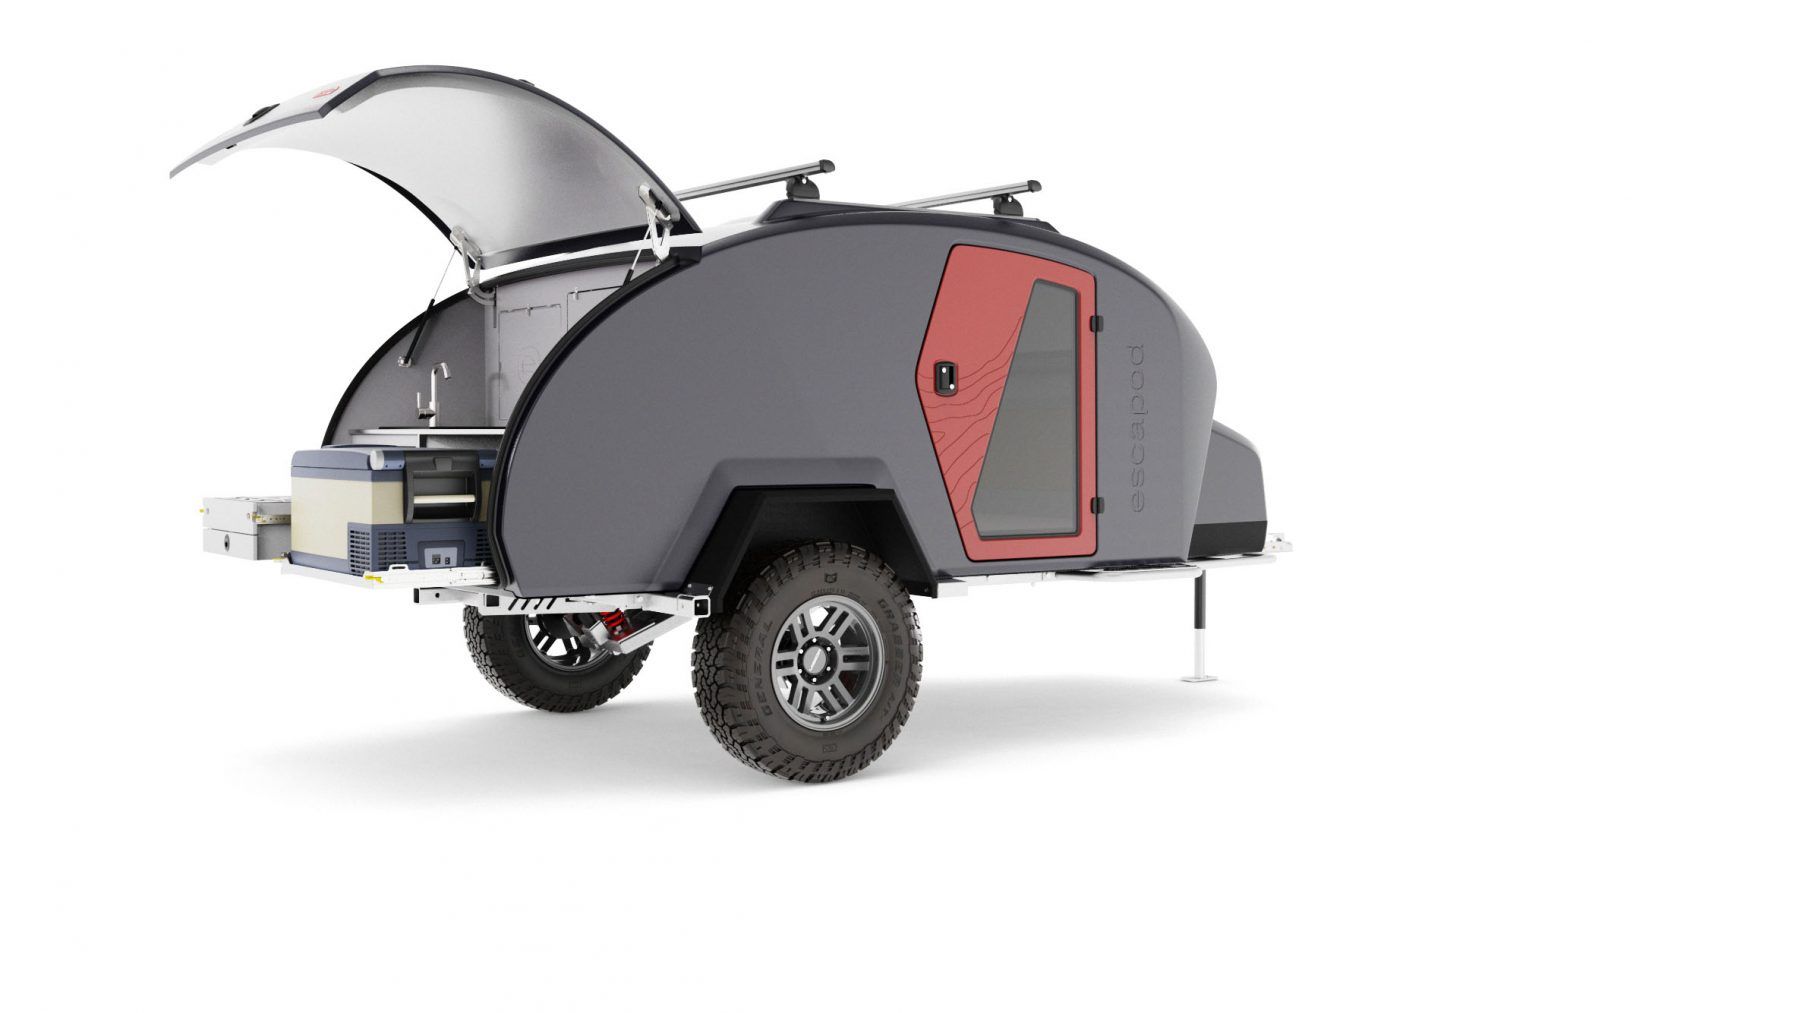 Topo2 Teardrop Camper Is a Disruptive Off-Grid Machine Built With Recycled  Plastics - autoevolution